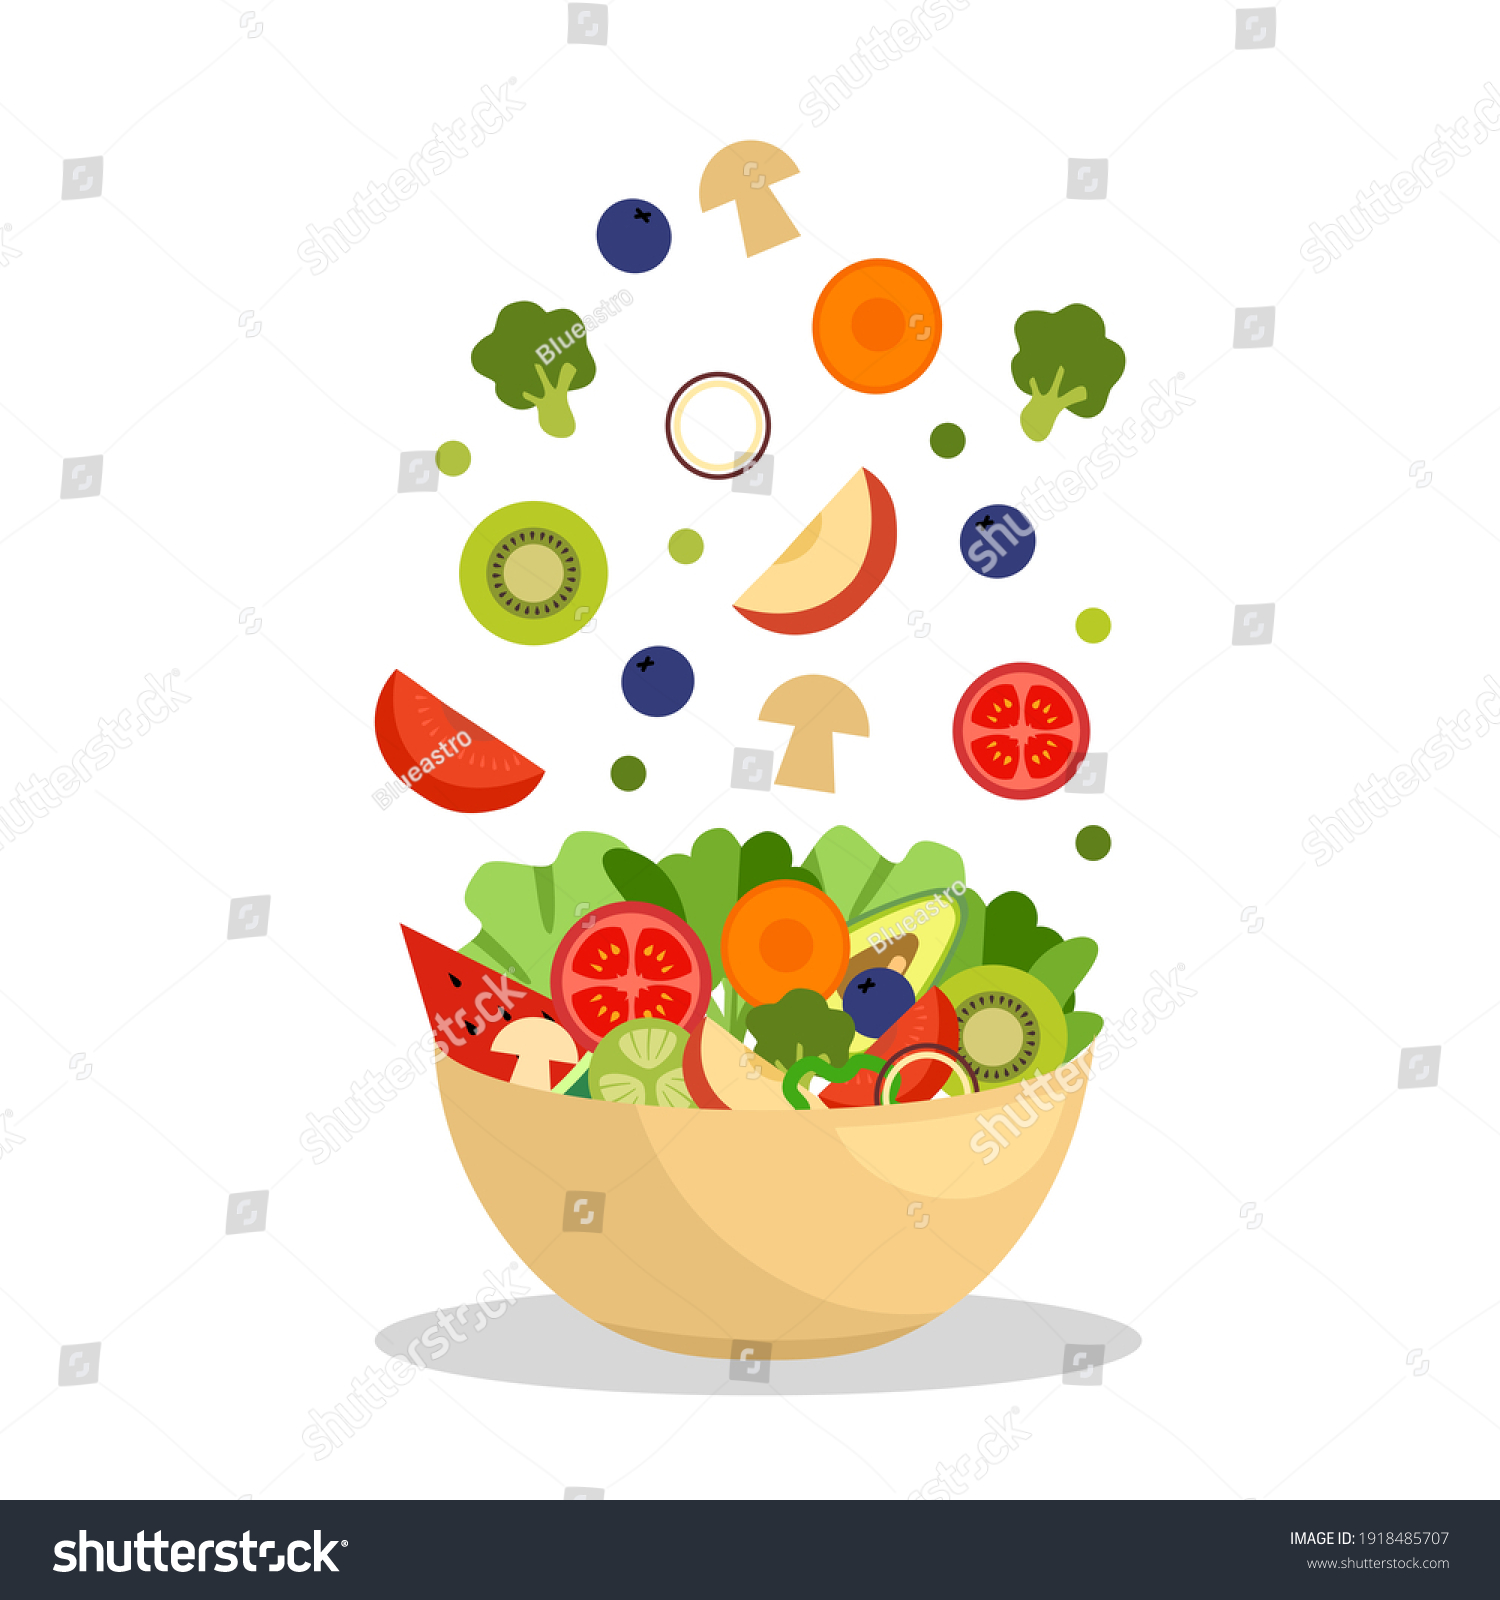 Vegetables and fruits in bowl in flat design. Salad bar for healthy meal. Vegetarian dish. Healthy food on white background. #1918485707